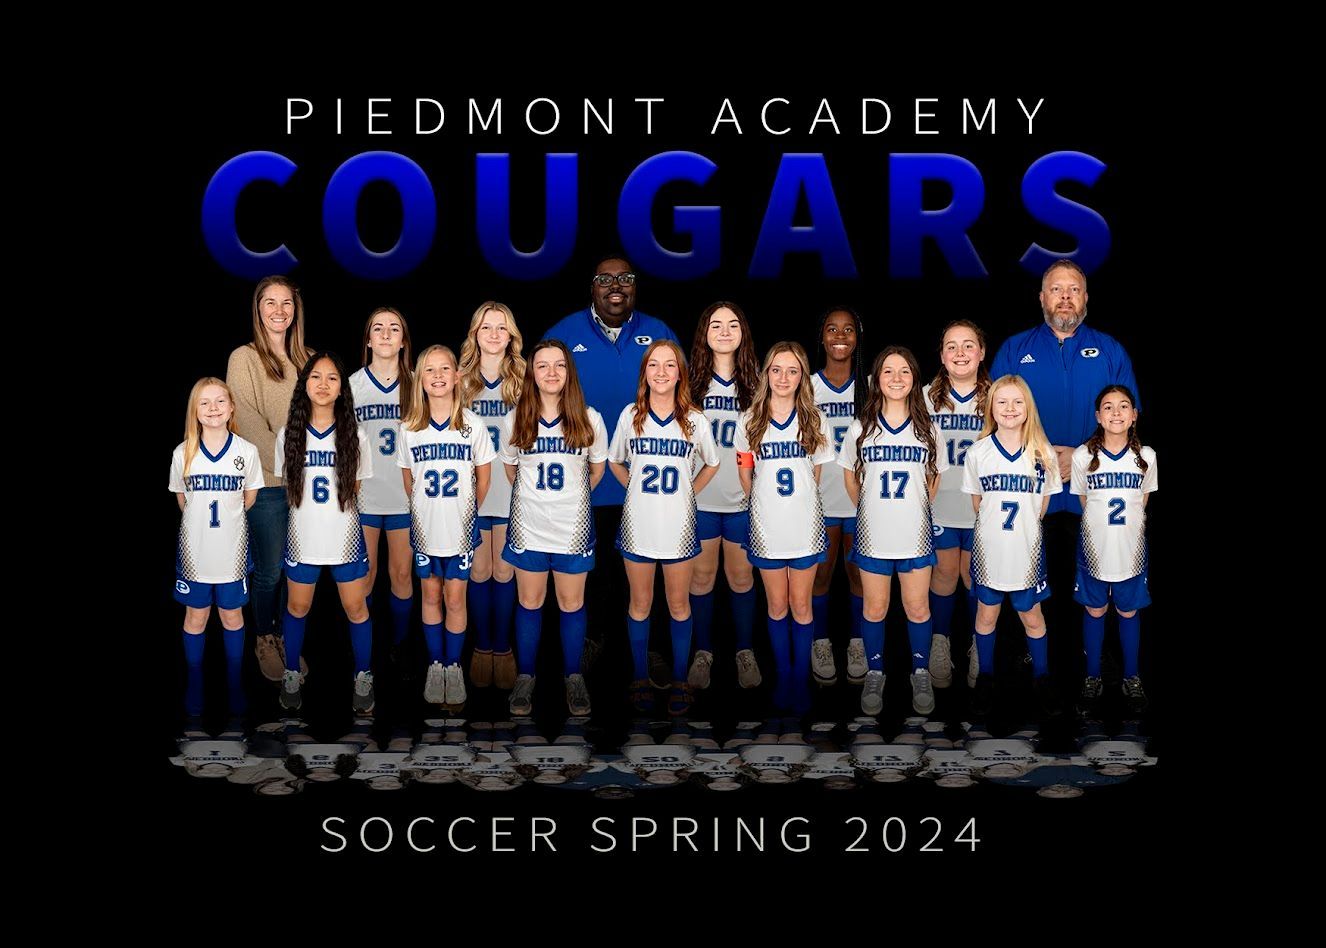 the piedmont academy cougars soccer team is posing for a team photo .